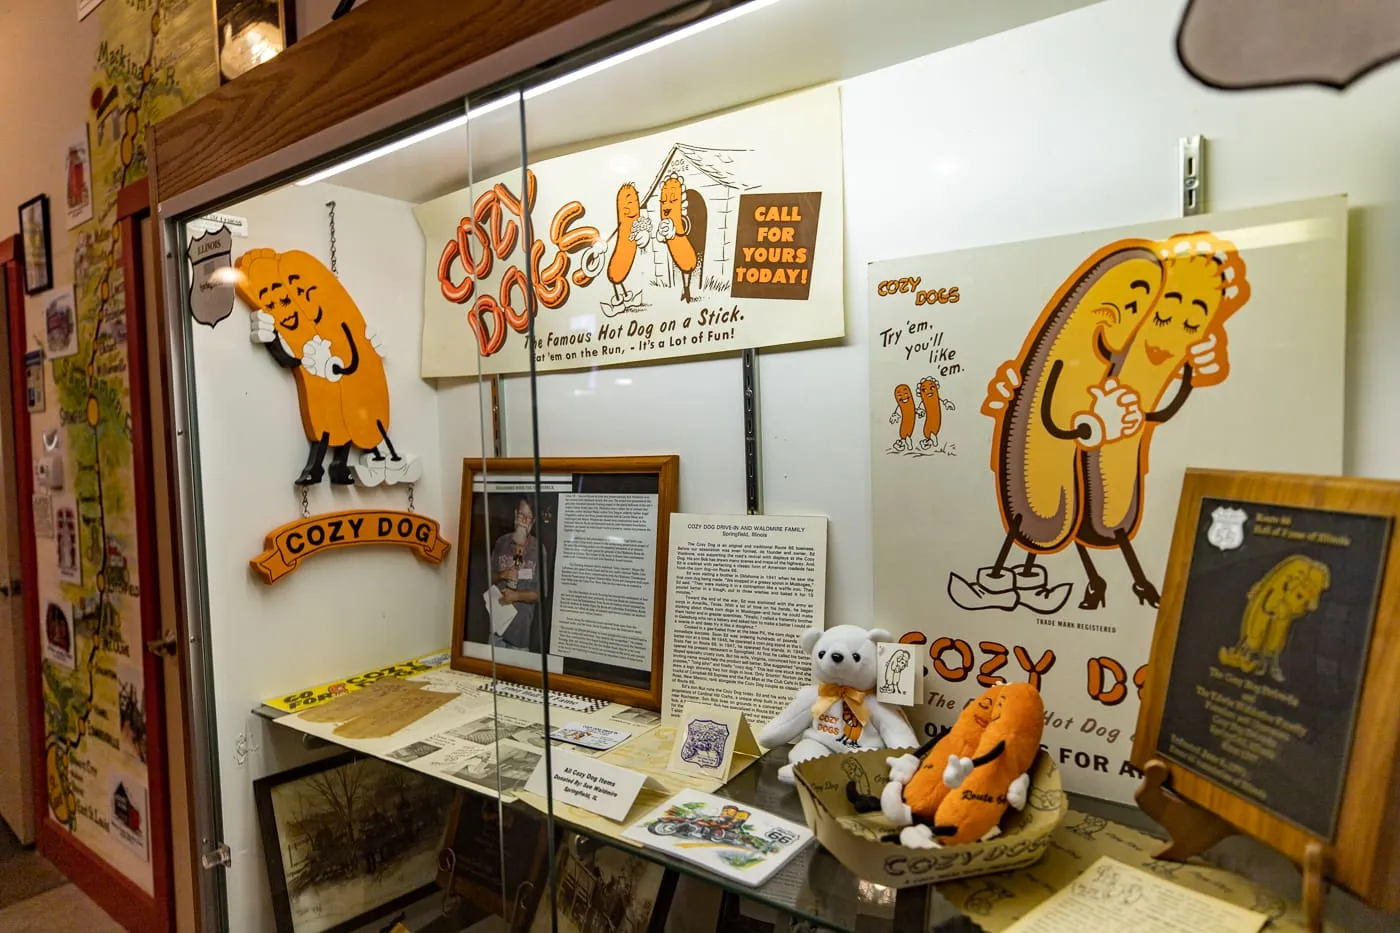 Cozy Dog Drive In Display at the Illinois Route 66 Hall of Fame & Museum in Pontiac, Illinois